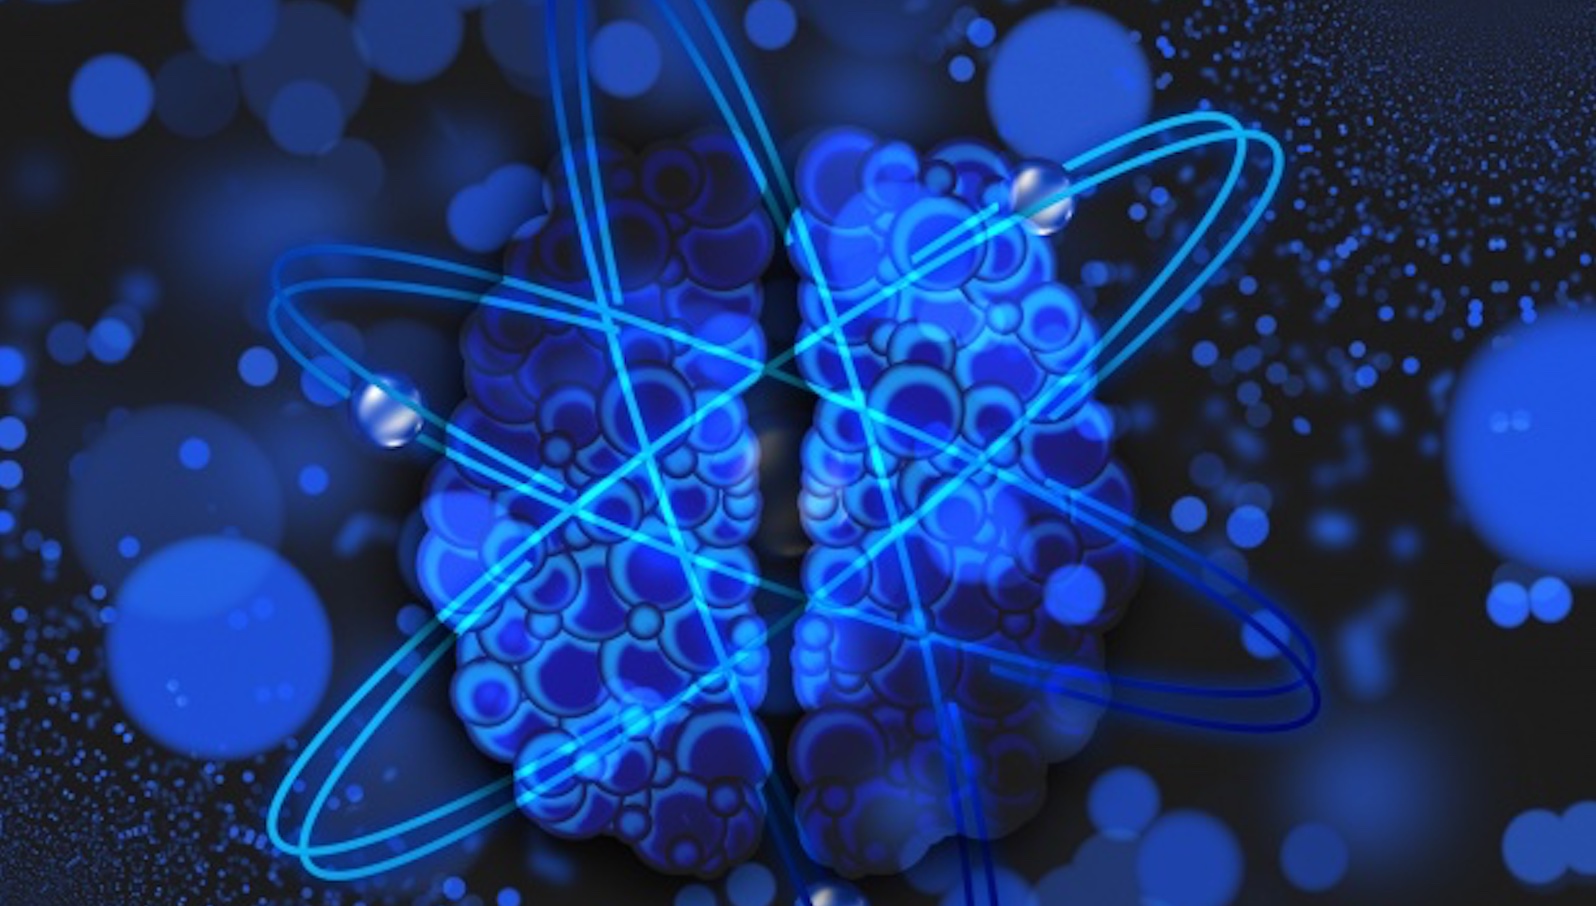 A blue brain with neurons surrounding it and blue energy balls against a black background